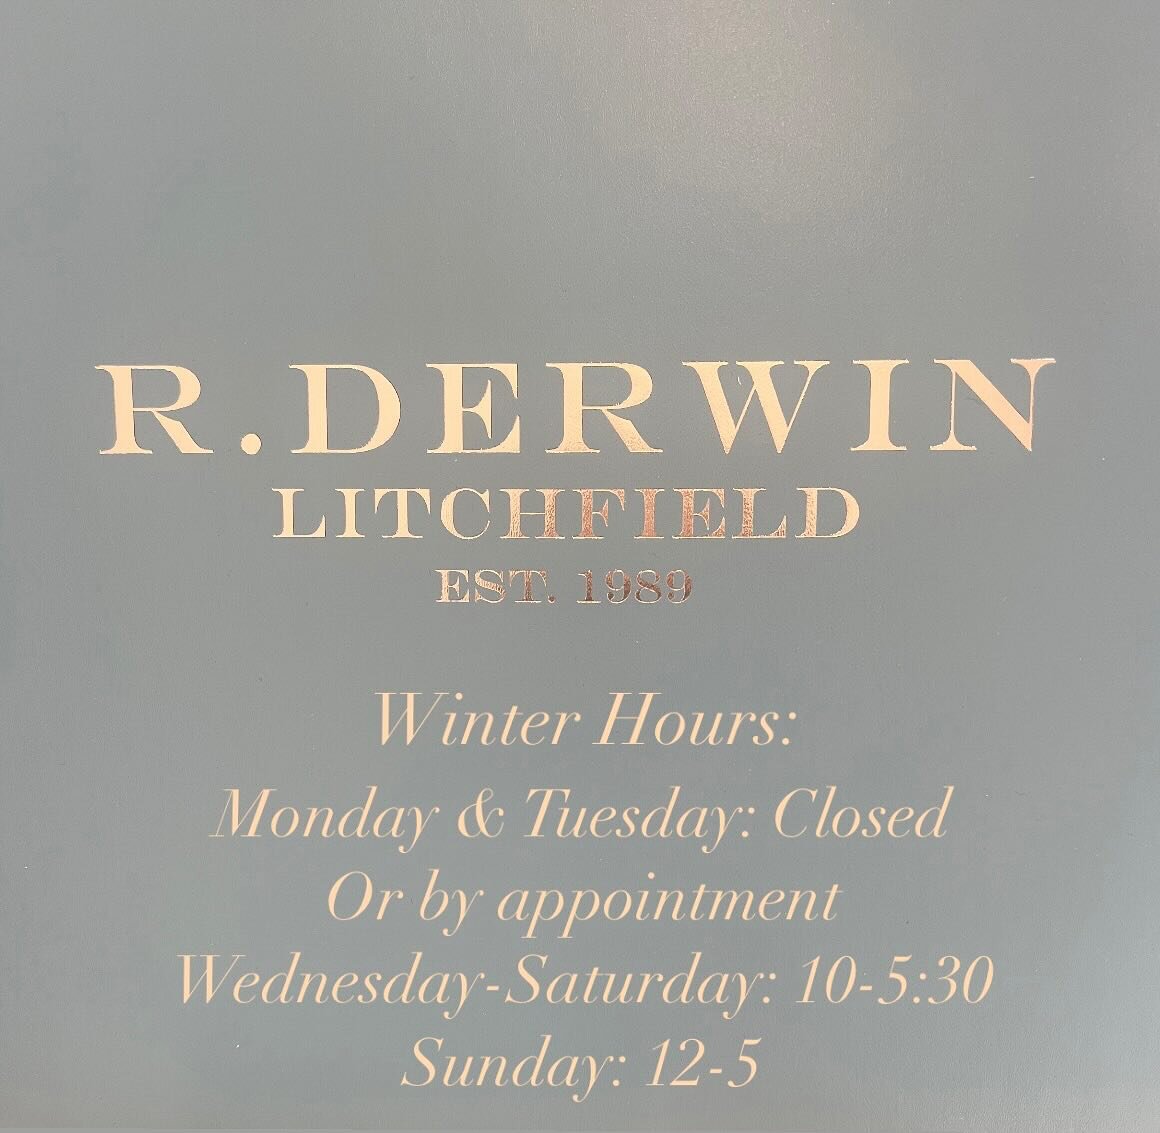 Winter hours:
Monday &amp; Tuesday: Closed or by appointment 
Wednesday-Saturday: 10-5:30
Sunday: 12-5